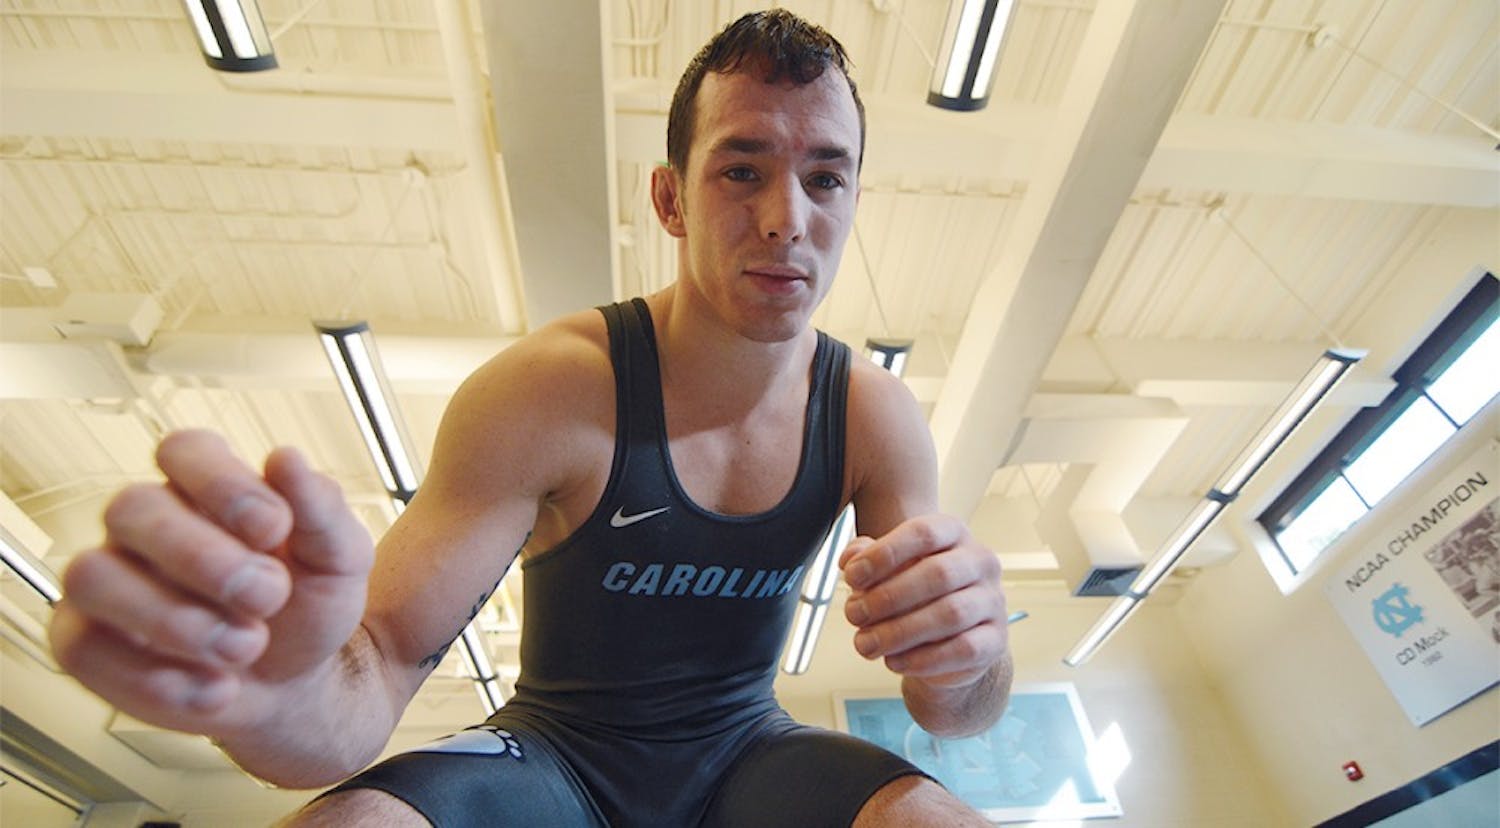 	Evan Henderson is a junior on the UNC wrestling team. Henderson has been wrestling since kindergarten and says it took several years to adjust to the wrestling lifestyle.